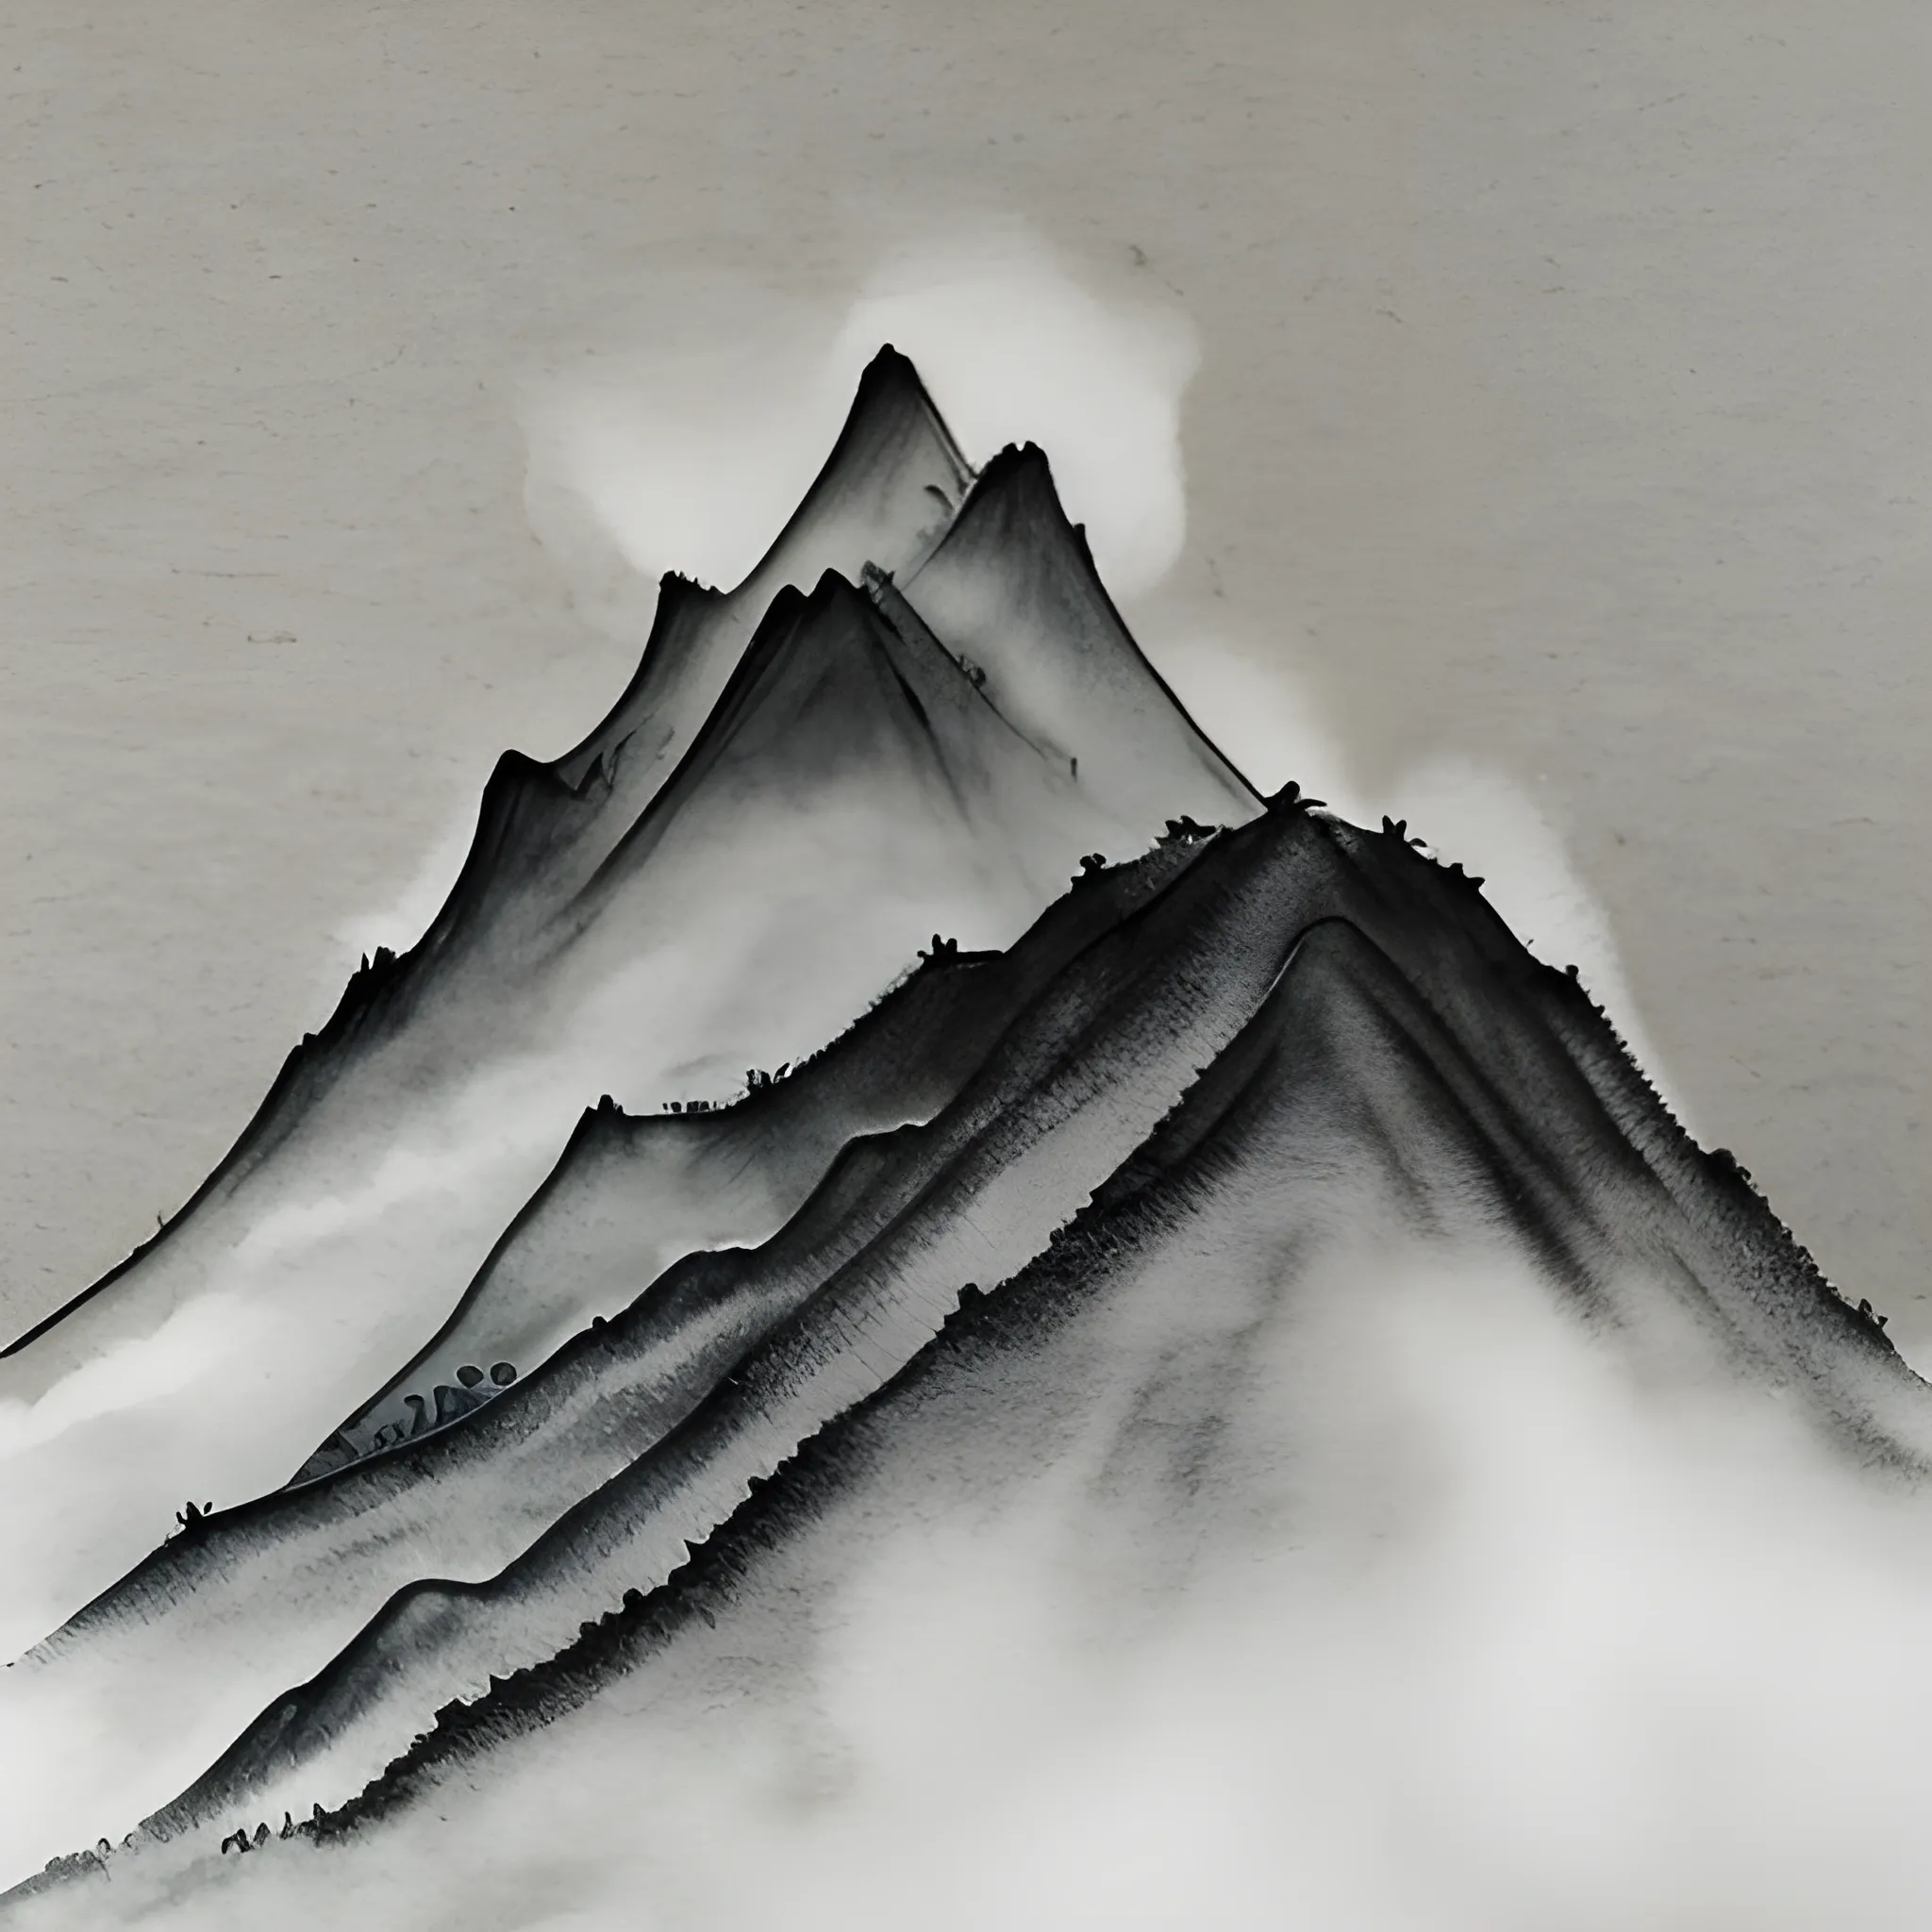 Produce a Shuǐ mò huà (Chinese ink wash painting) that portrays a mountain with a softly rounded outline enveloped in mist, showcasing a tiny temple perched on its peak.